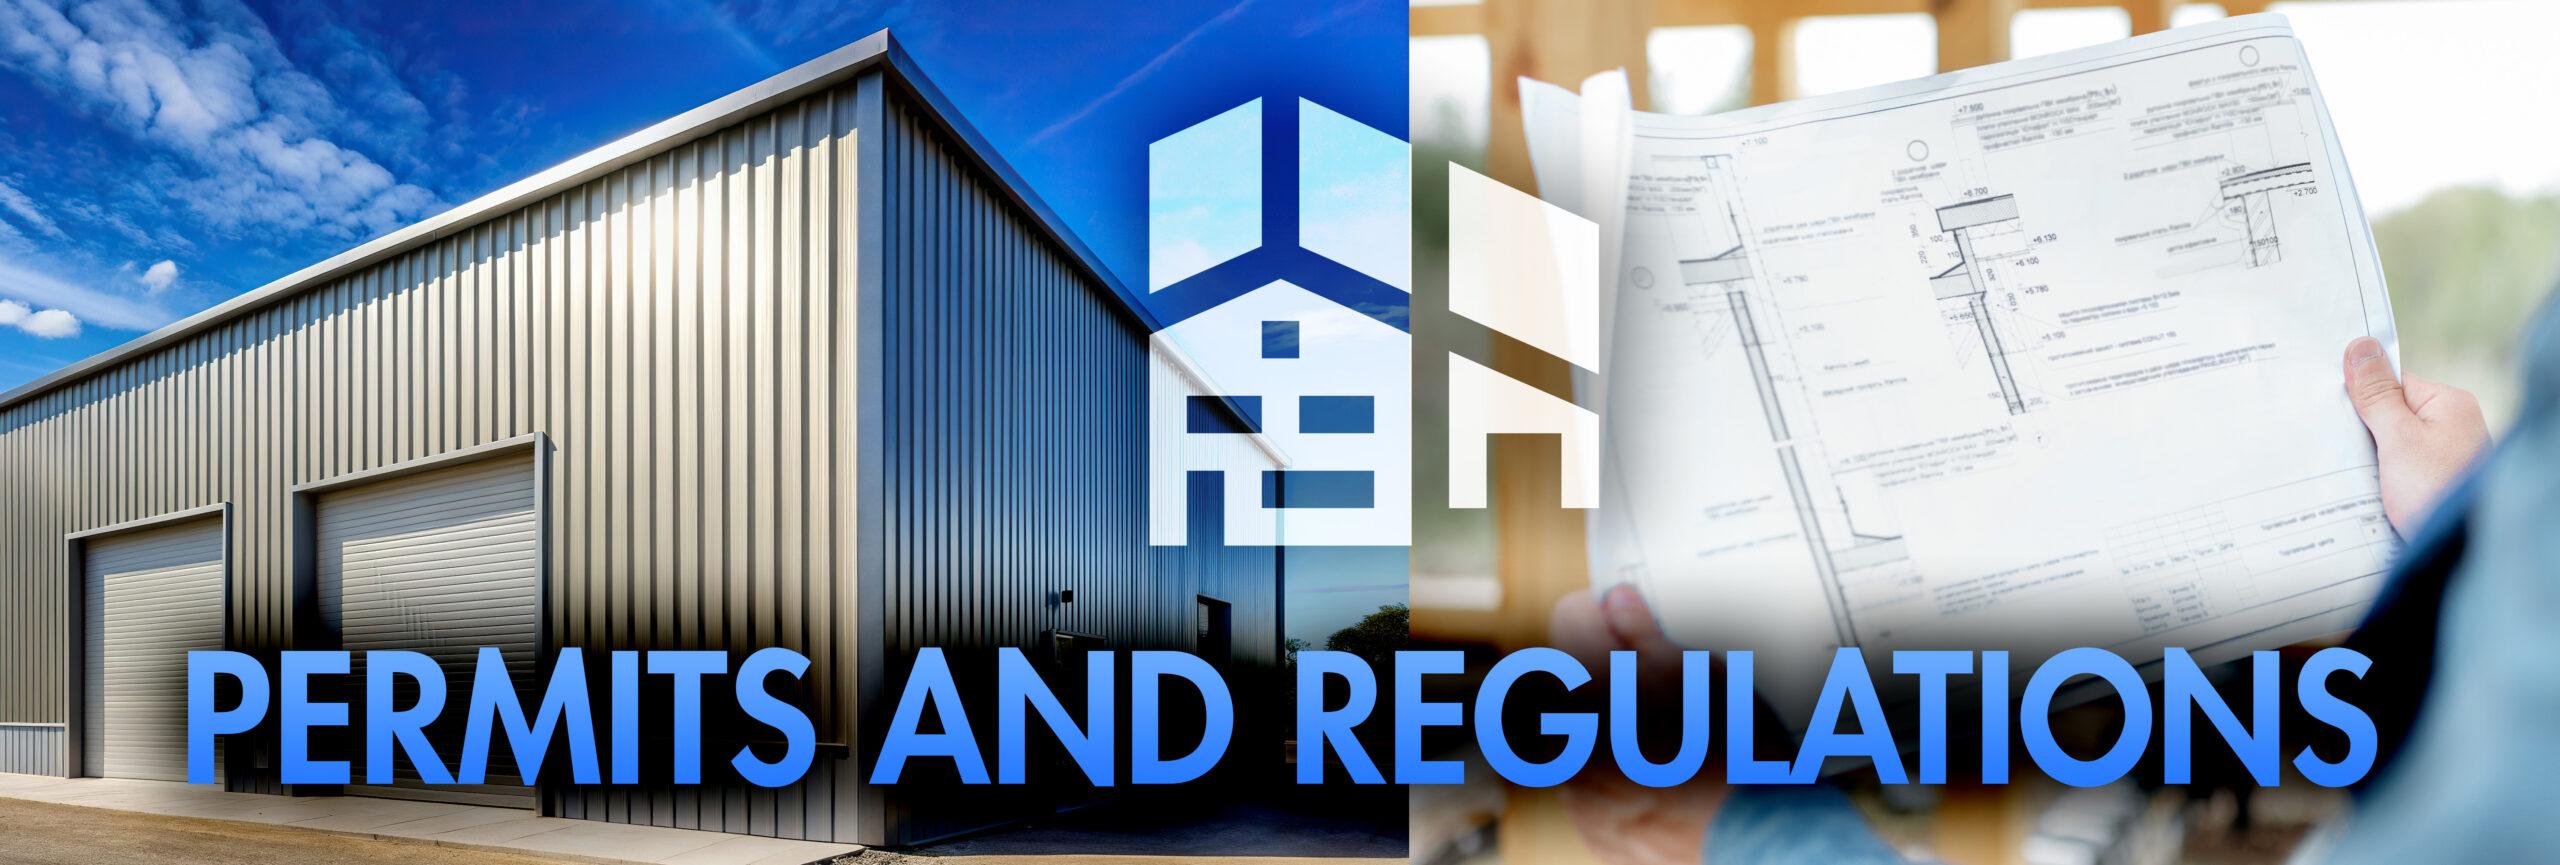 Building Permits and Regulations for Metal Buildings in Colorado